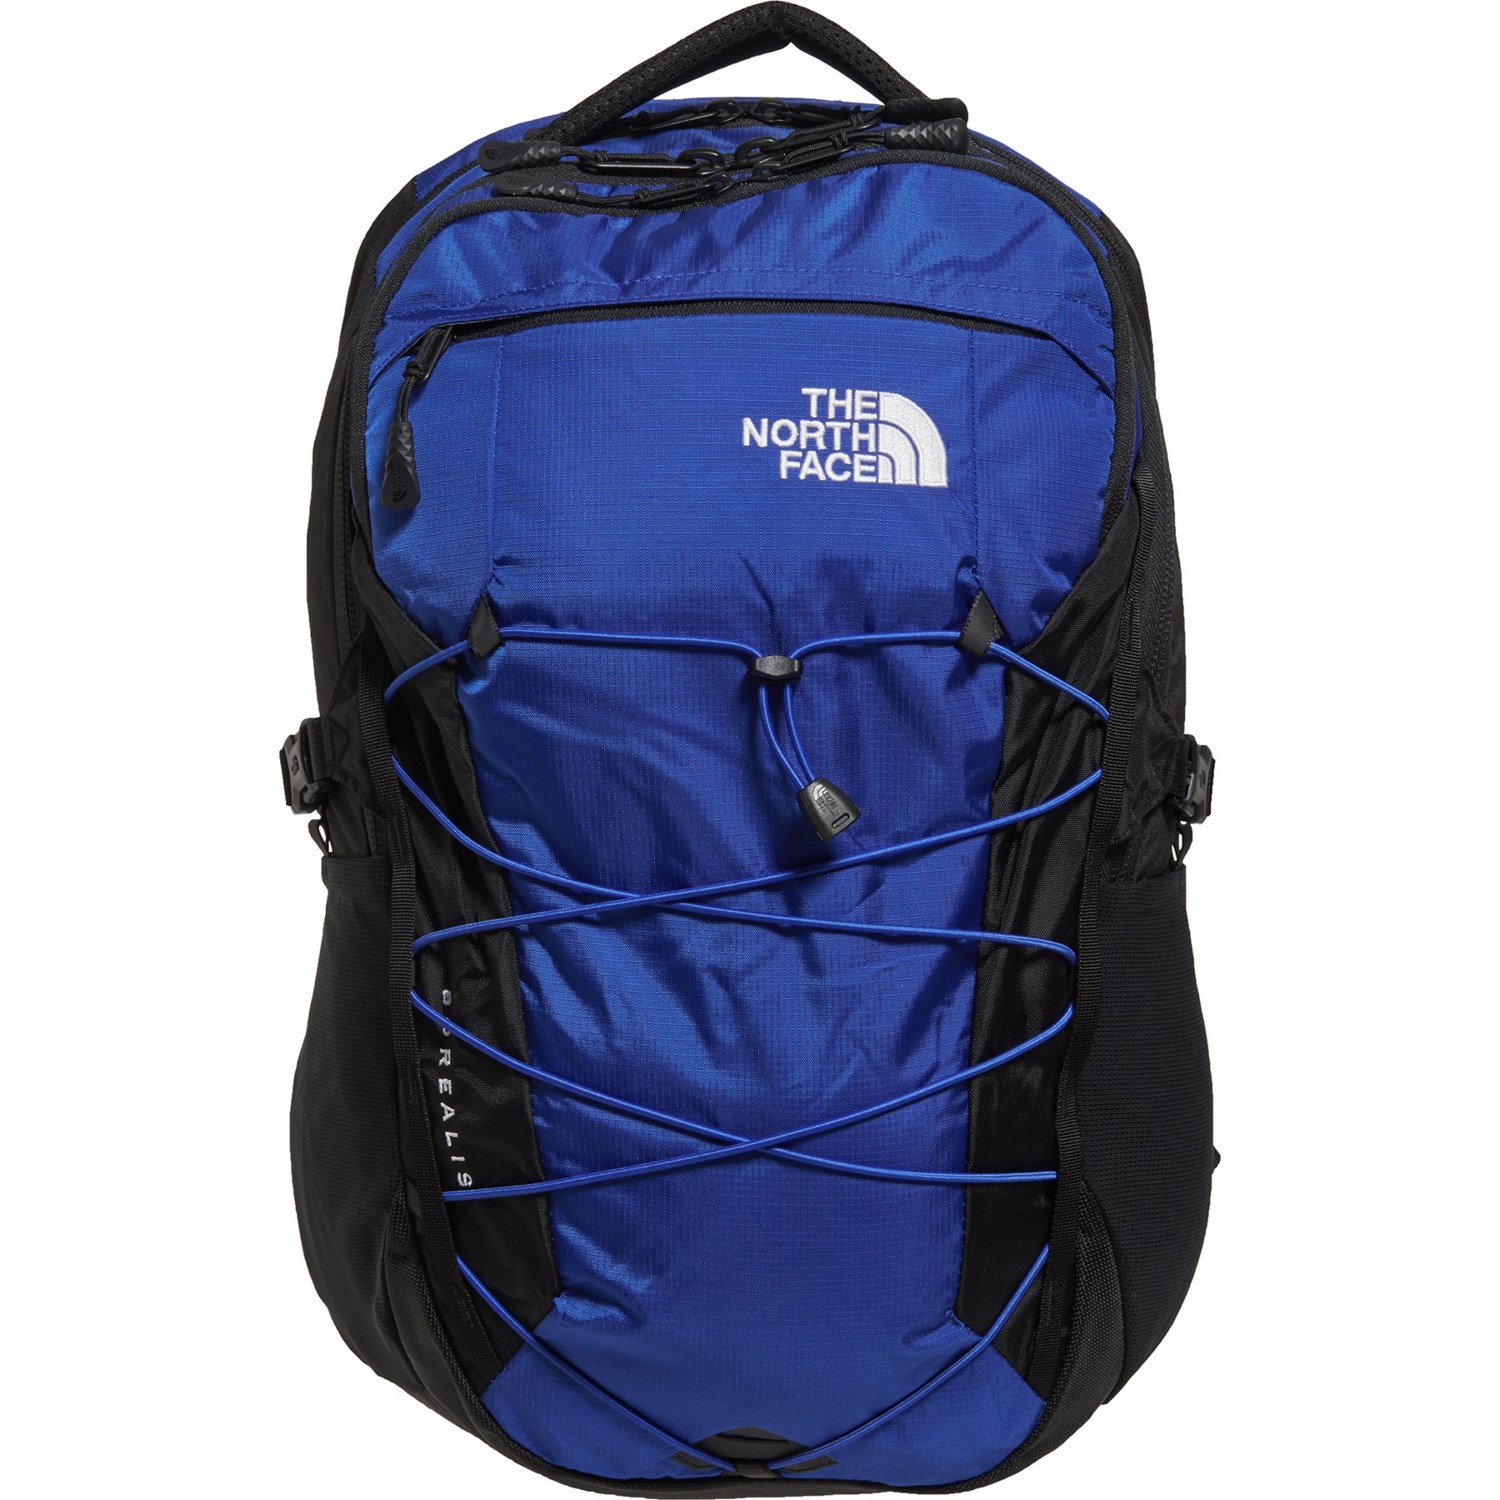 The North Face Borealis Backpack 28l